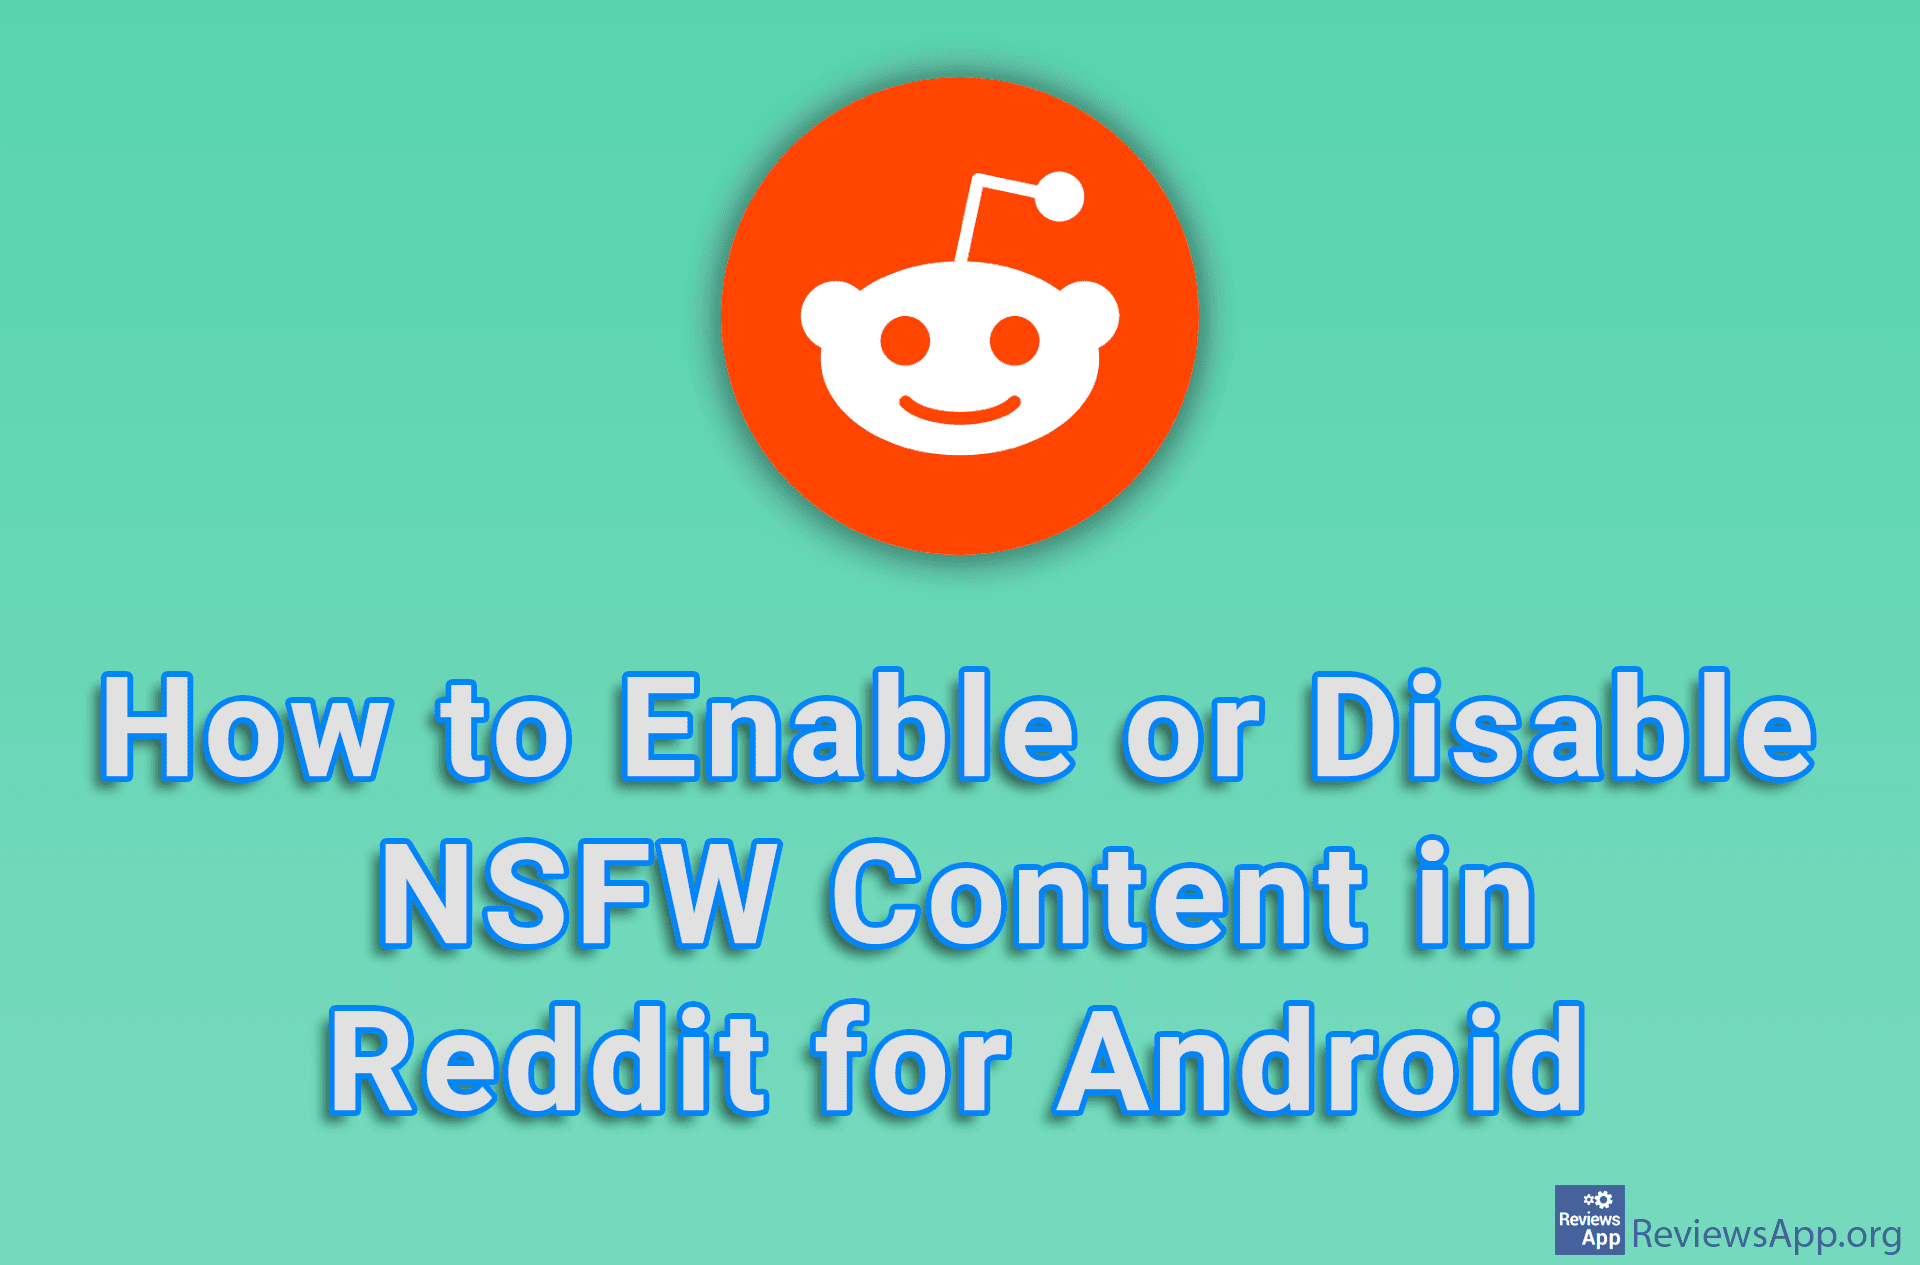 How to Enable or Disable NSFW Content in Reddit for Android